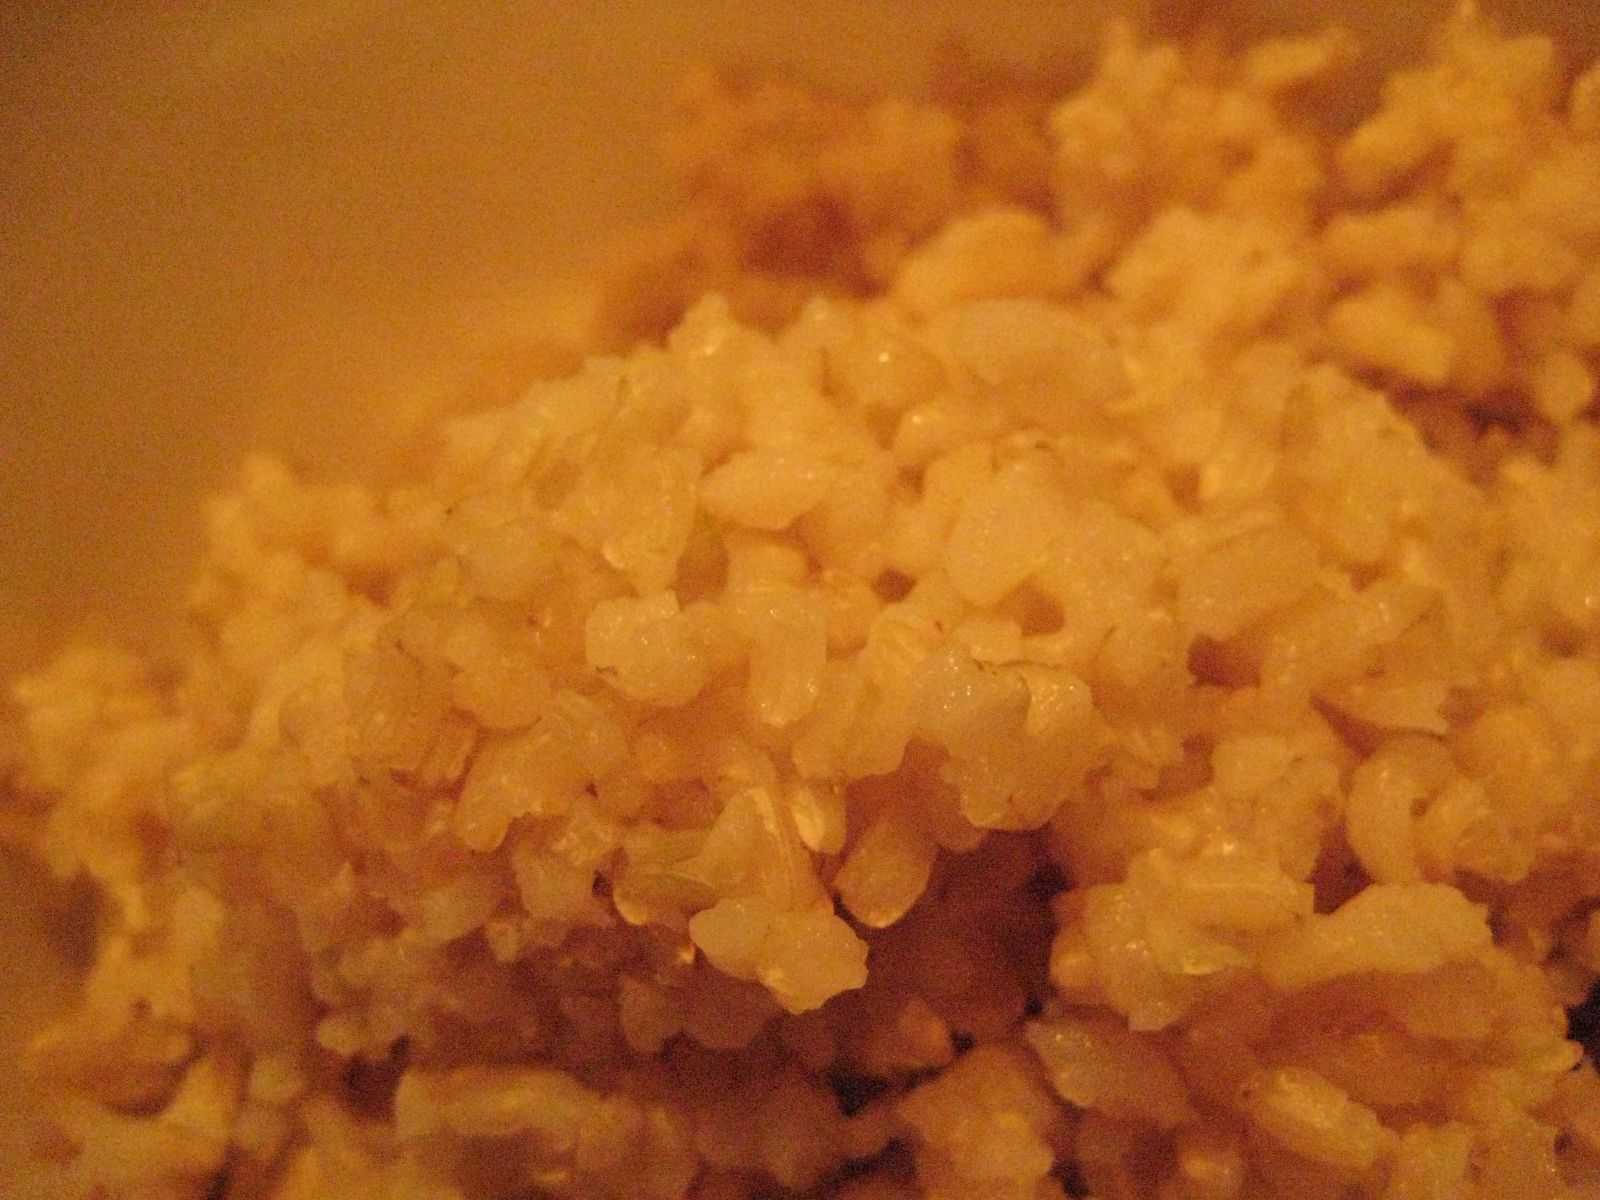 popcorn that is being cooked in the stove